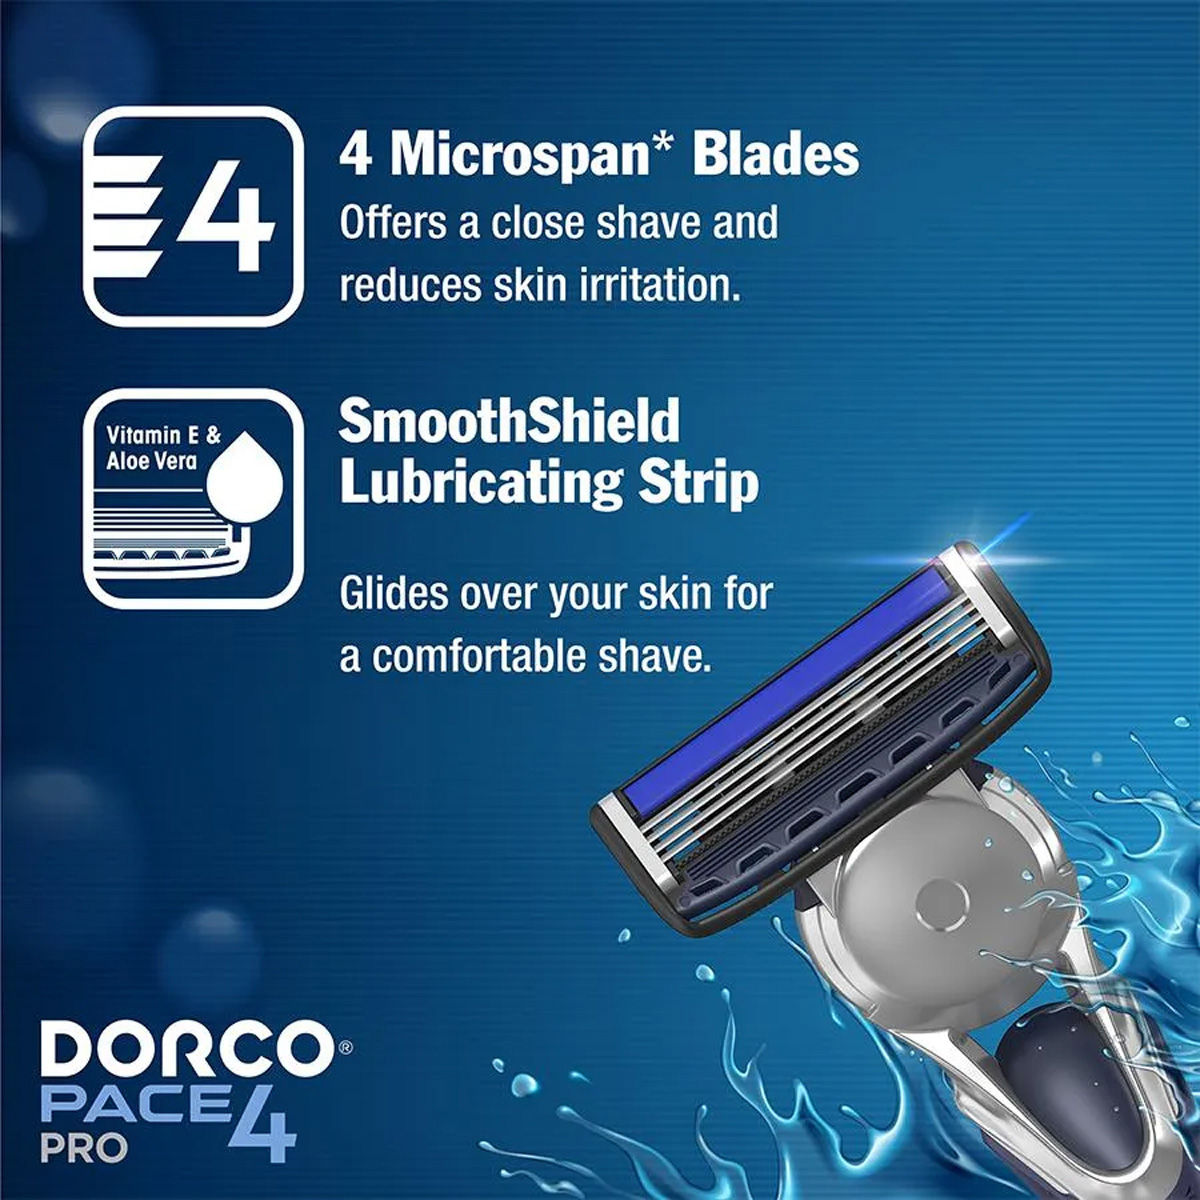 Dorco Pace 4 Pro Cartridges, 2 Count Price, Uses, Side Effects ...